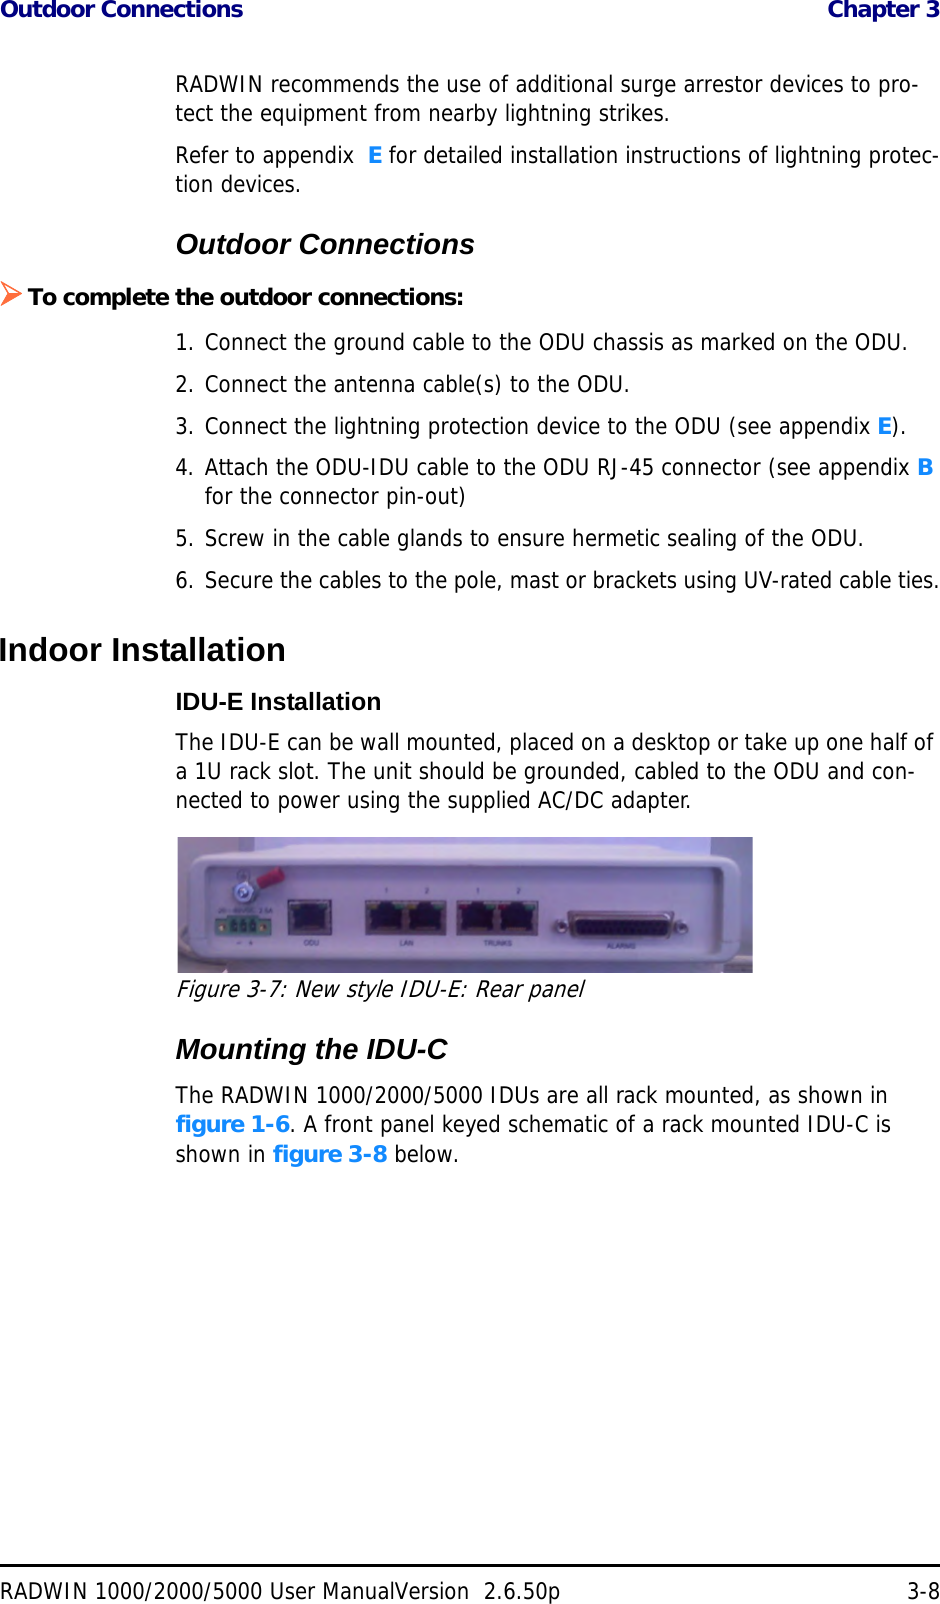 Outdoor Connections  Chapter 3RADWIN 1000/2000/5000 User ManualVersion  2.6.50p 3-8RADWIN recommends the use of additional surge arrestor devices to pro-tect the equipment from nearby lightning strikes.Refer to appendix  E for detailed installation instructions of lightning protec-tion devices.Outdoor ConnectionsTo complete the outdoor connections:1. Connect the ground cable to the ODU chassis as marked on the ODU.2. Connect the antenna cable(s) to the ODU.3. Connect the lightning protection device to the ODU (see appendix E).4. Attach the ODU-IDU cable to the ODU RJ-45 connector (see appendix B for the connector pin-out)5. Screw in the cable glands to ensure hermetic sealing of the ODU.6. Secure the cables to the pole, mast or brackets using UV-rated cable ties.Indoor InstallationIDU-E InstallationThe IDU-E can be wall mounted, placed on a desktop or take up one half of a 1U rack slot. The unit should be grounded, cabled to the ODU and con-nected to power using the supplied AC/DC adapter.Figure 3-7: New style IDU-E: Rear panelMounting the IDU-CThe RADWIN 1000/2000/5000 IDUs are all rack mounted, as shown in figure 1-6. A front panel keyed schematic of a rack mounted IDU-C is shown in figure 3-8 below.